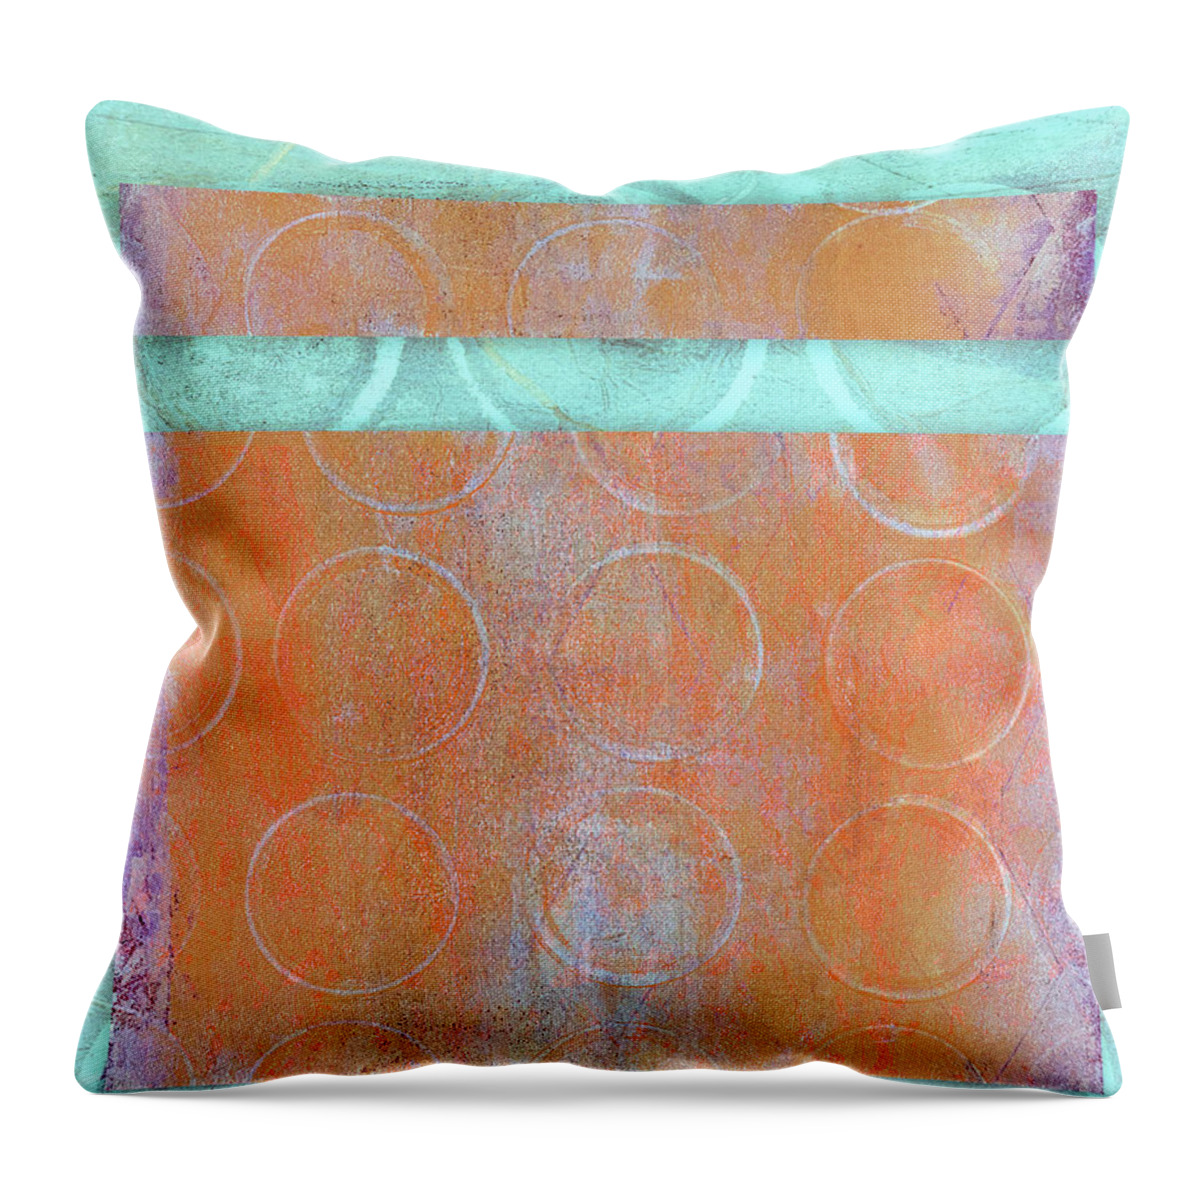 Circles Throw Pillow featuring the mixed media Circles and Rectangles Abstract by Carol Leigh